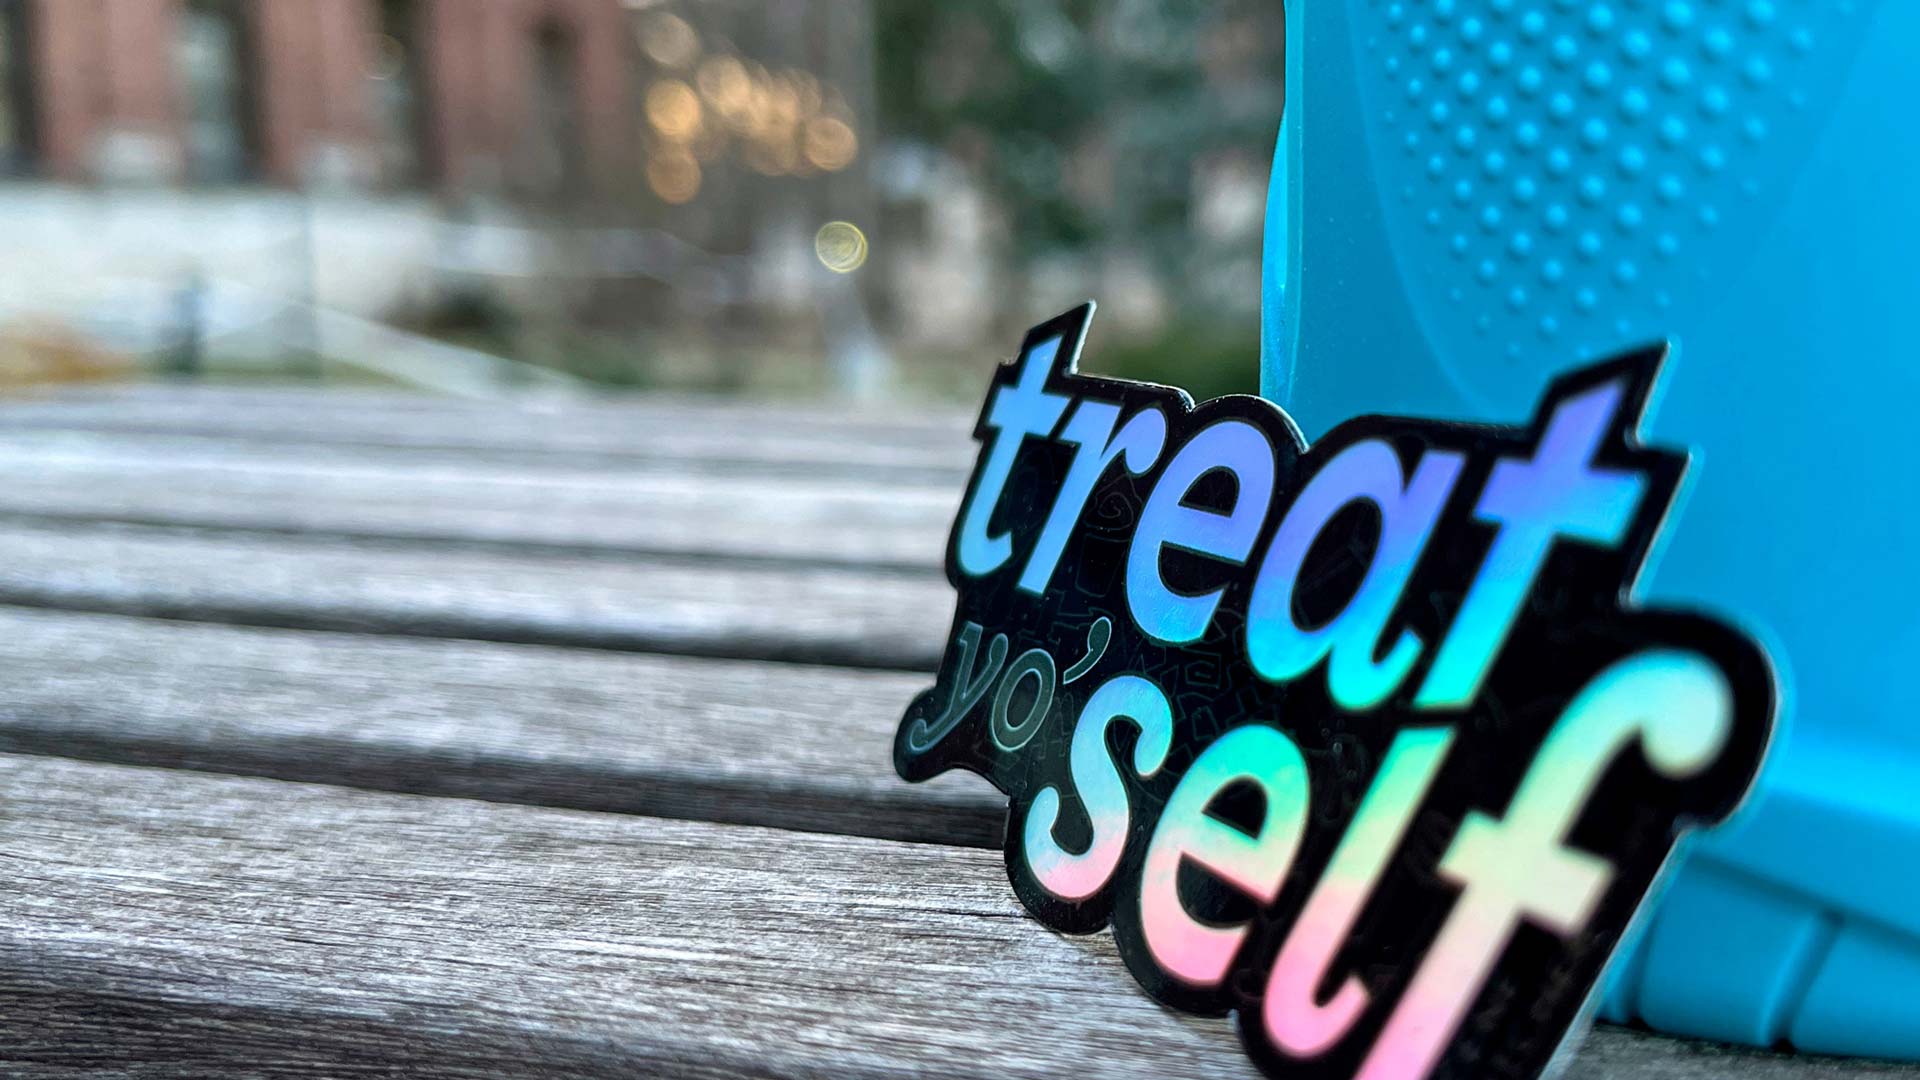 Vinyl “treat yo’ self” sticker with holographic finish propped against water bottle on outdoor table